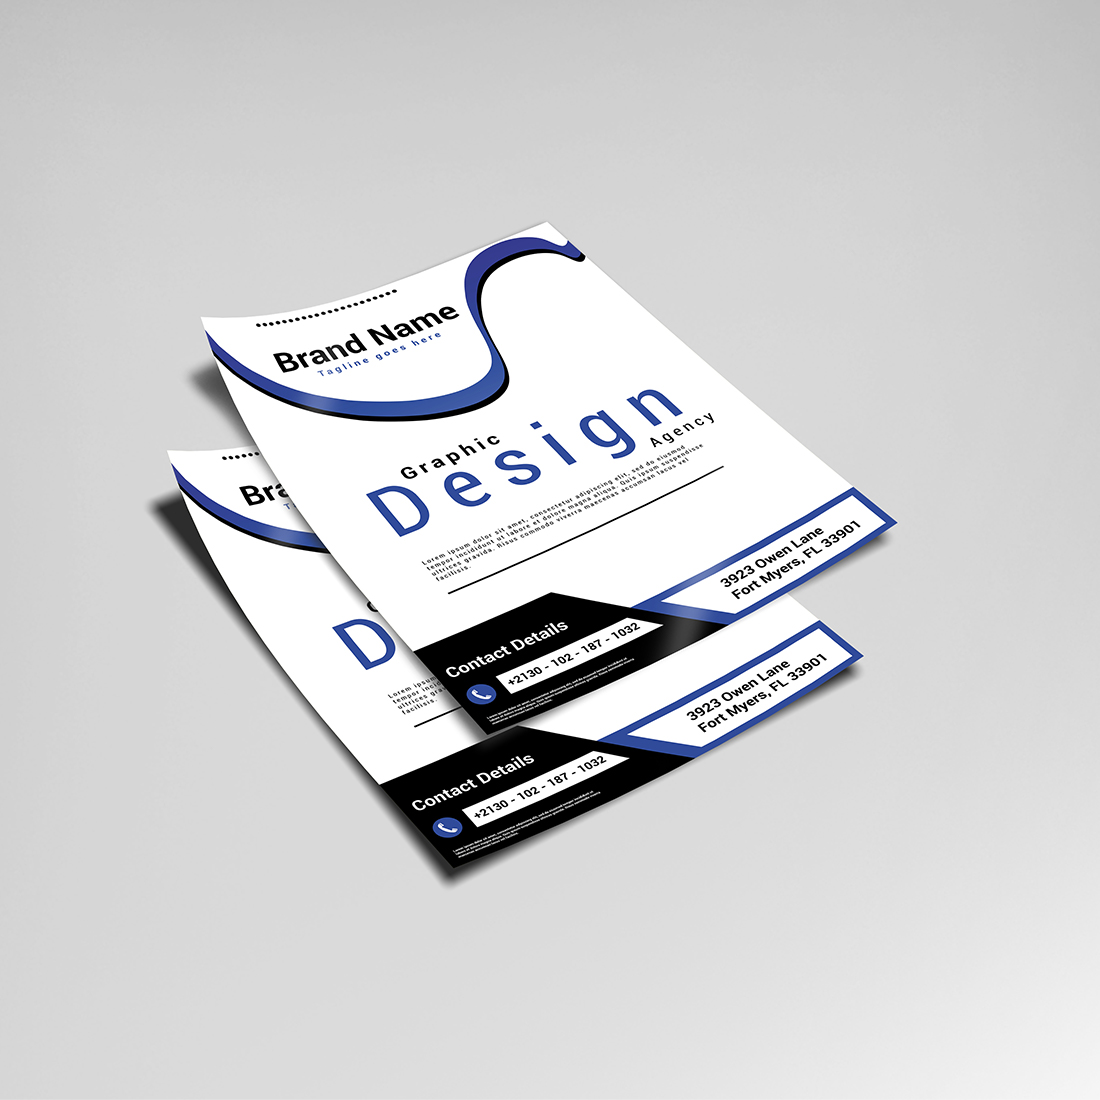 Graphic design agency poster design cover image.